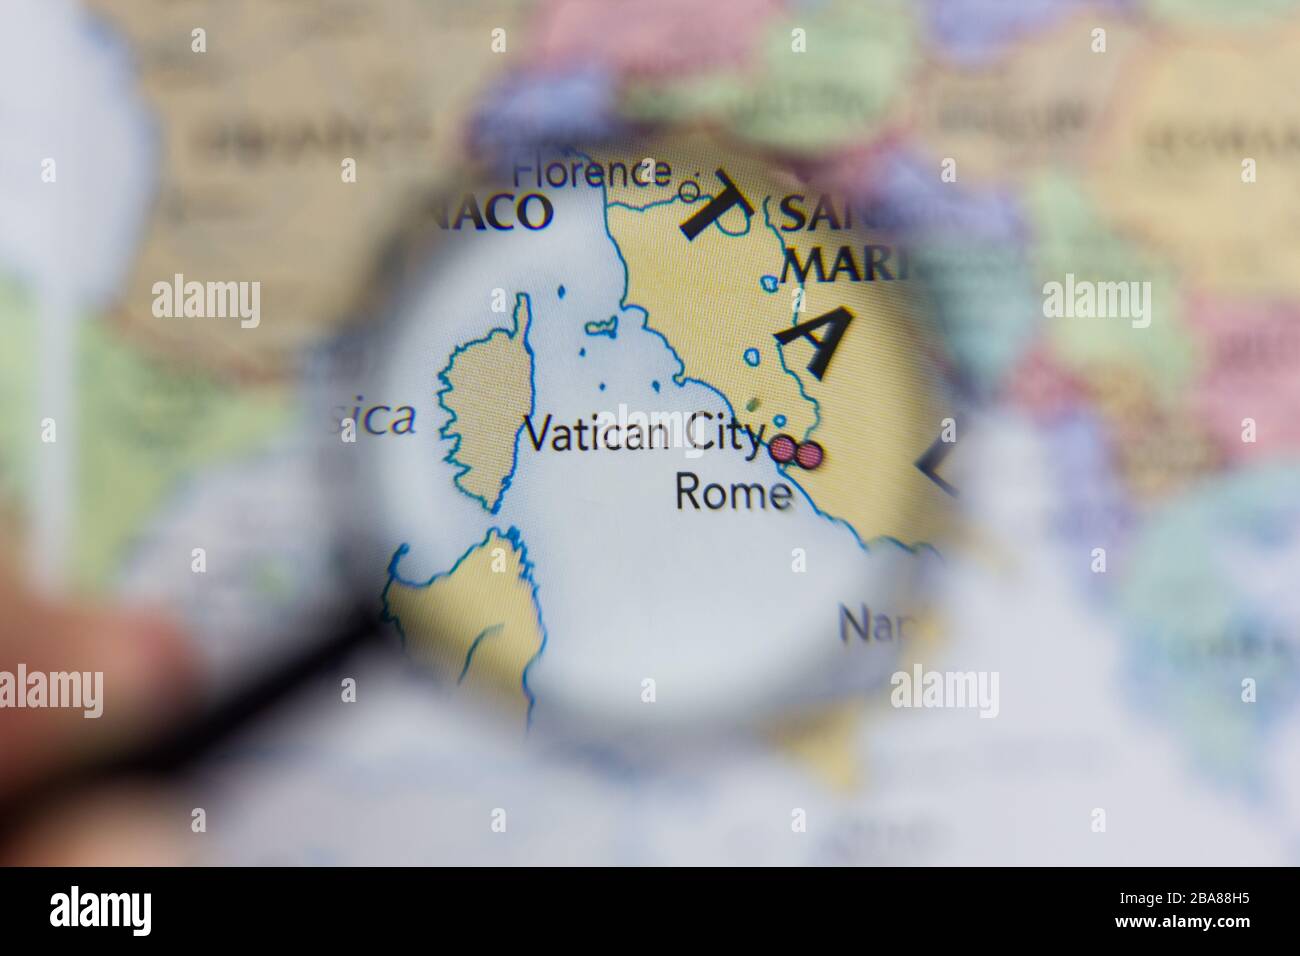 Vatican City On The Map Of The World Or Atlas Stock Photo Alamy